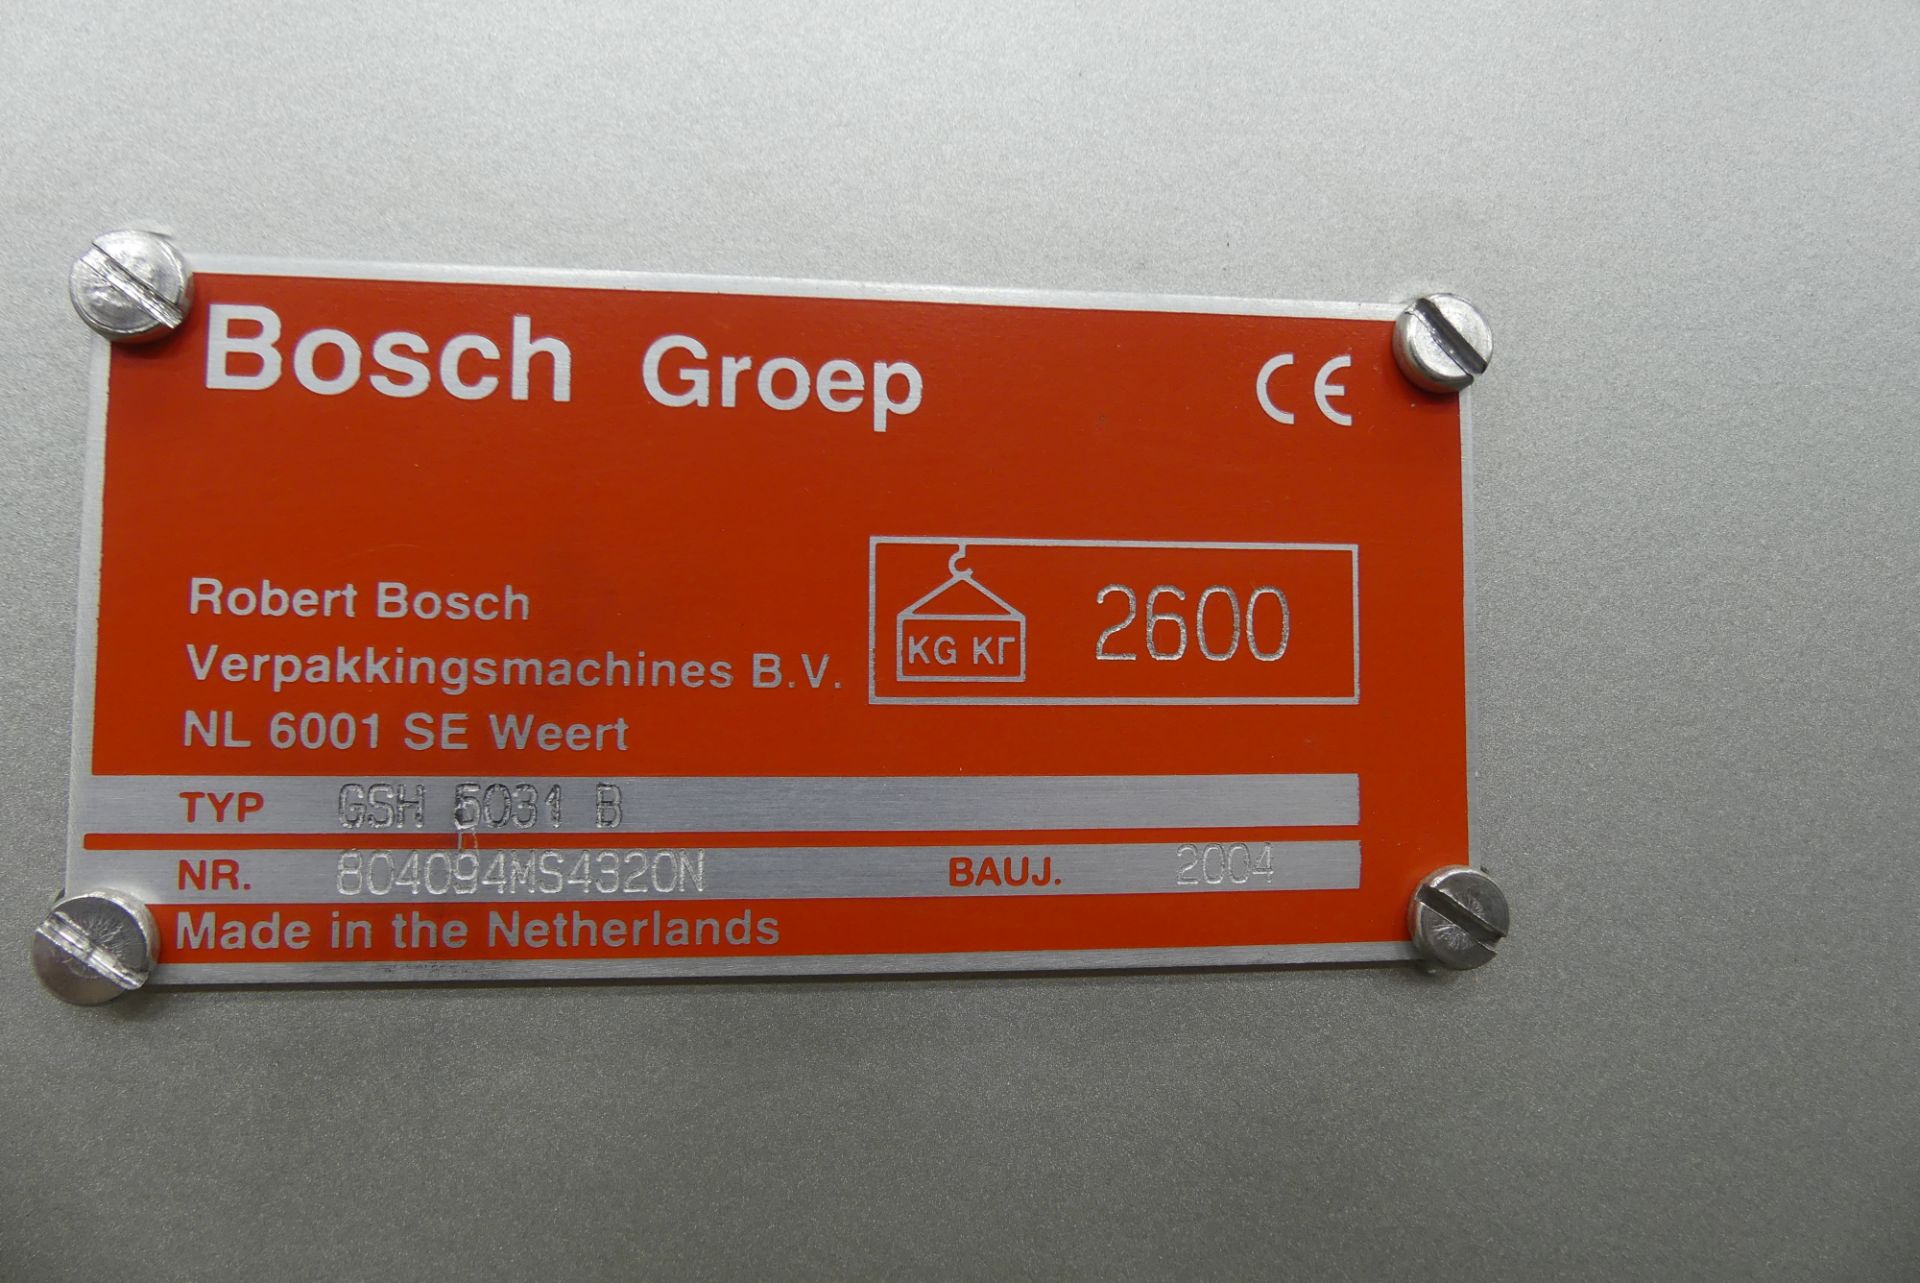 Bosch GSH 5031B Pick and Place Case Packer - Image 35 of 75